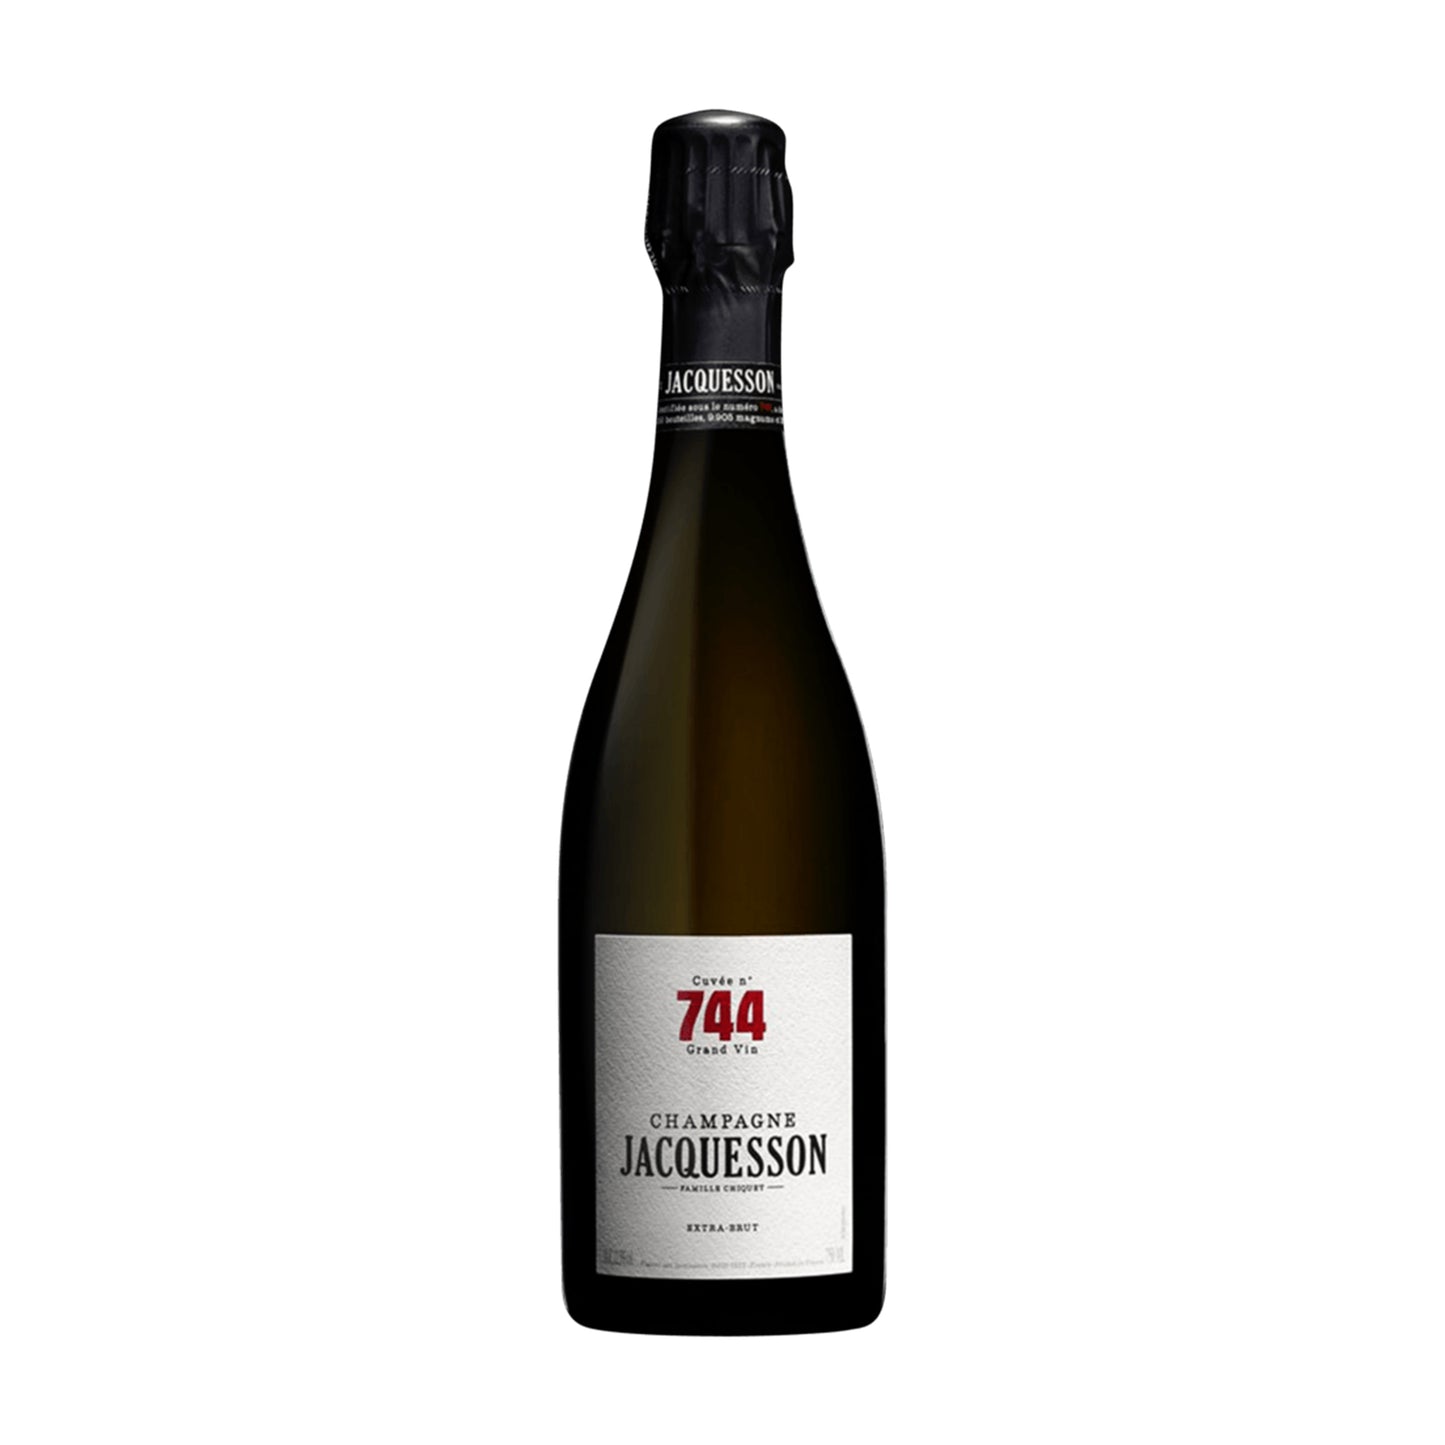 Jacquesson Cuvee 744 Extra Brut